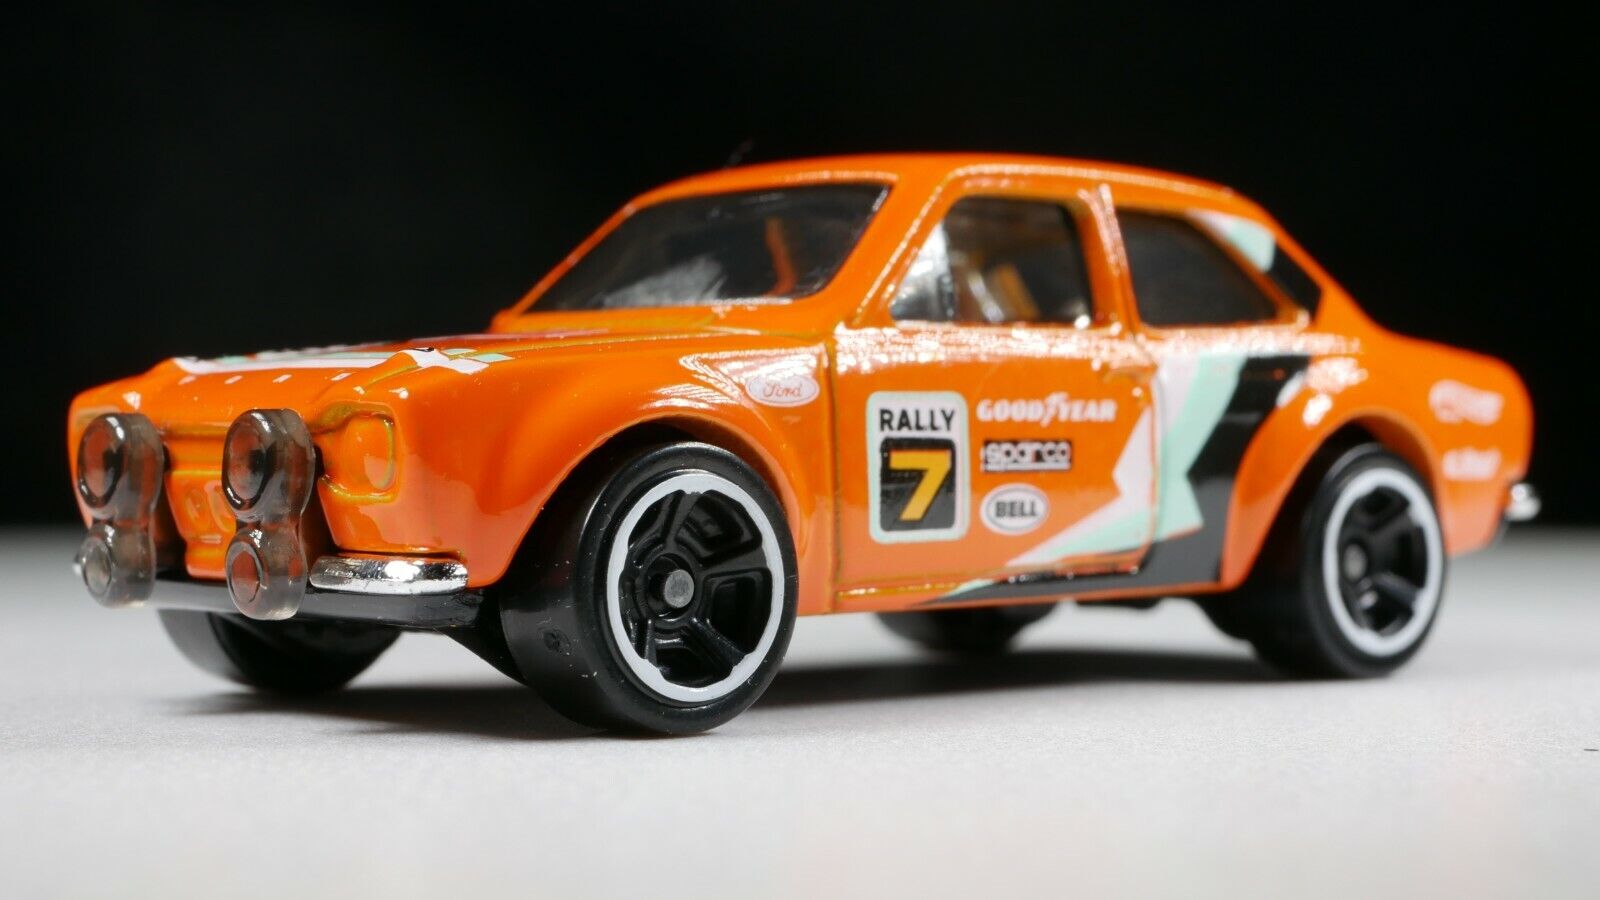 2020 - Hot Wheels NIP \'70 Ford Escort RS 1600 SPARCO RALLY #7 BELL GOOD YEAR